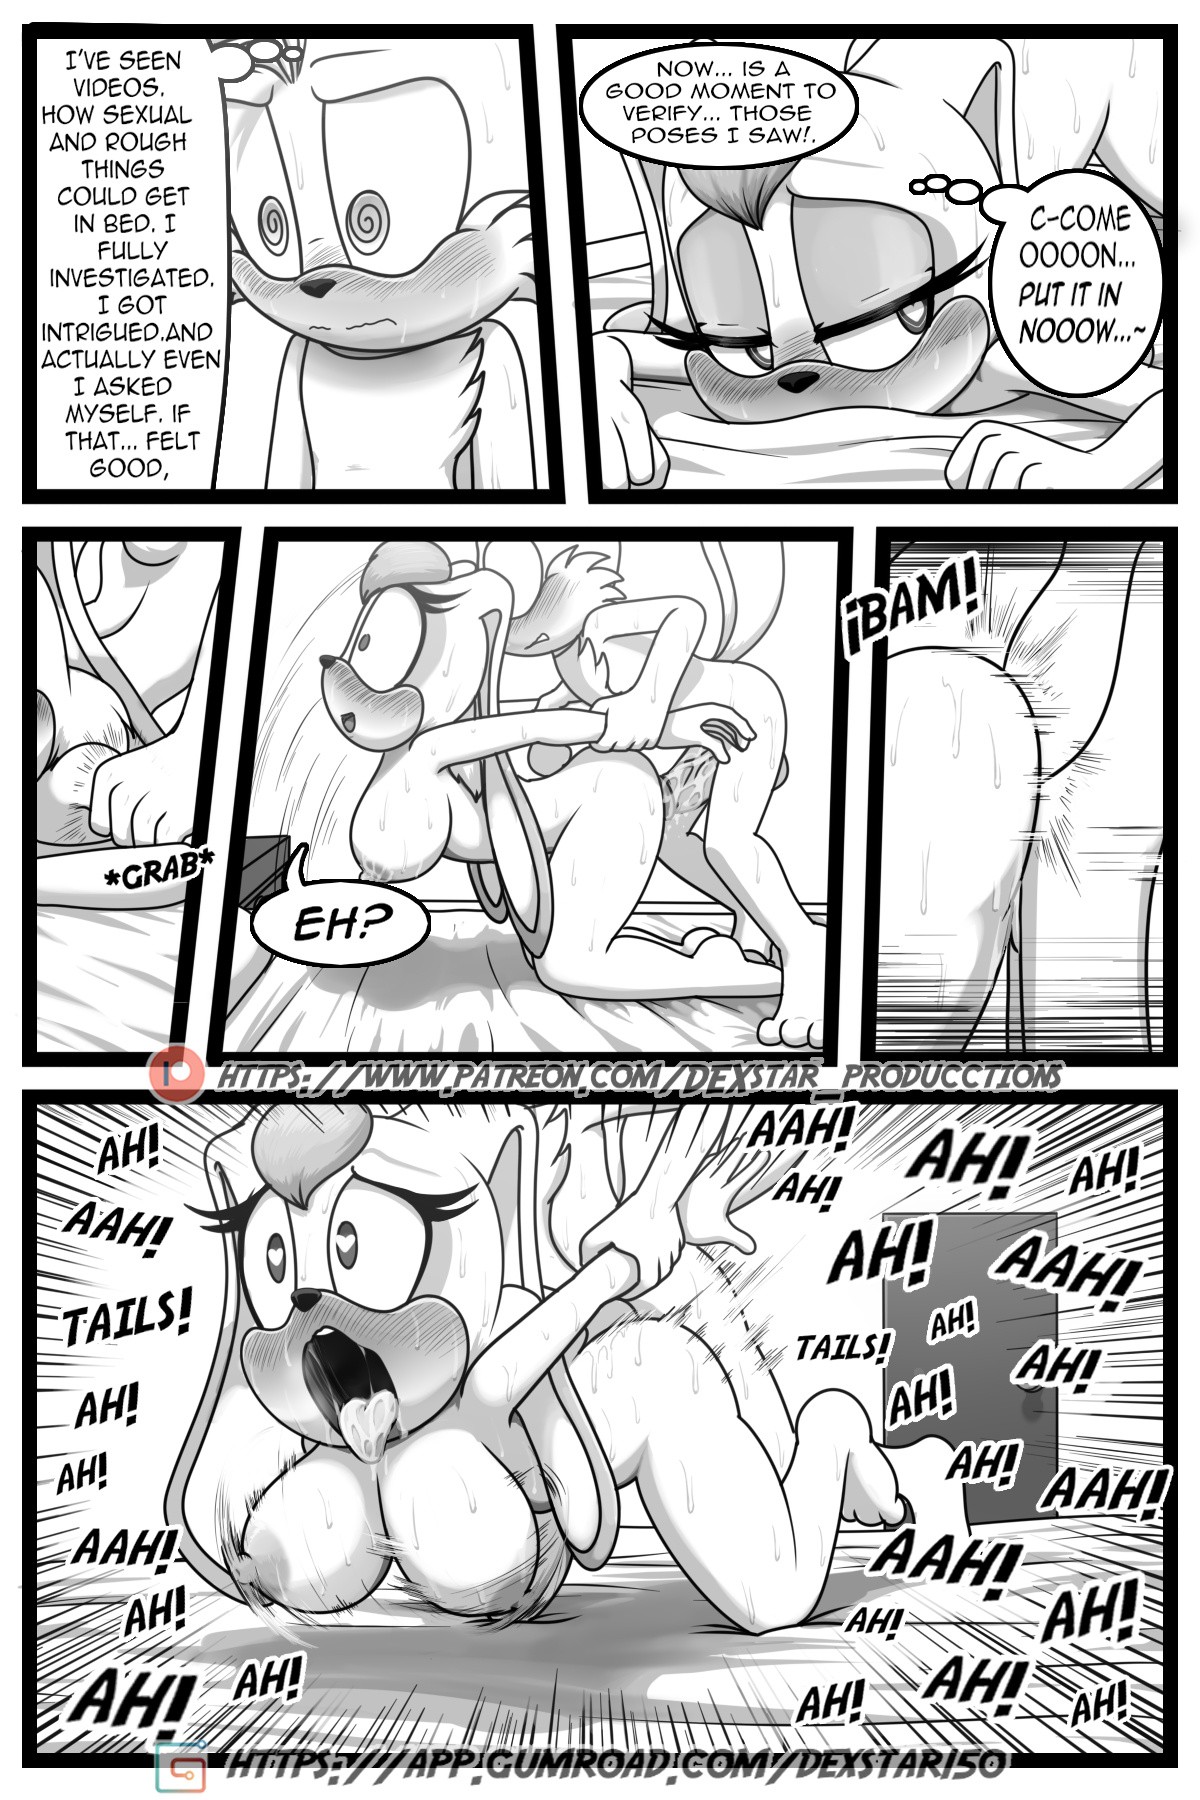 Please Fuck Me: Cream x Tail - Extra Story! porn comic picture 17